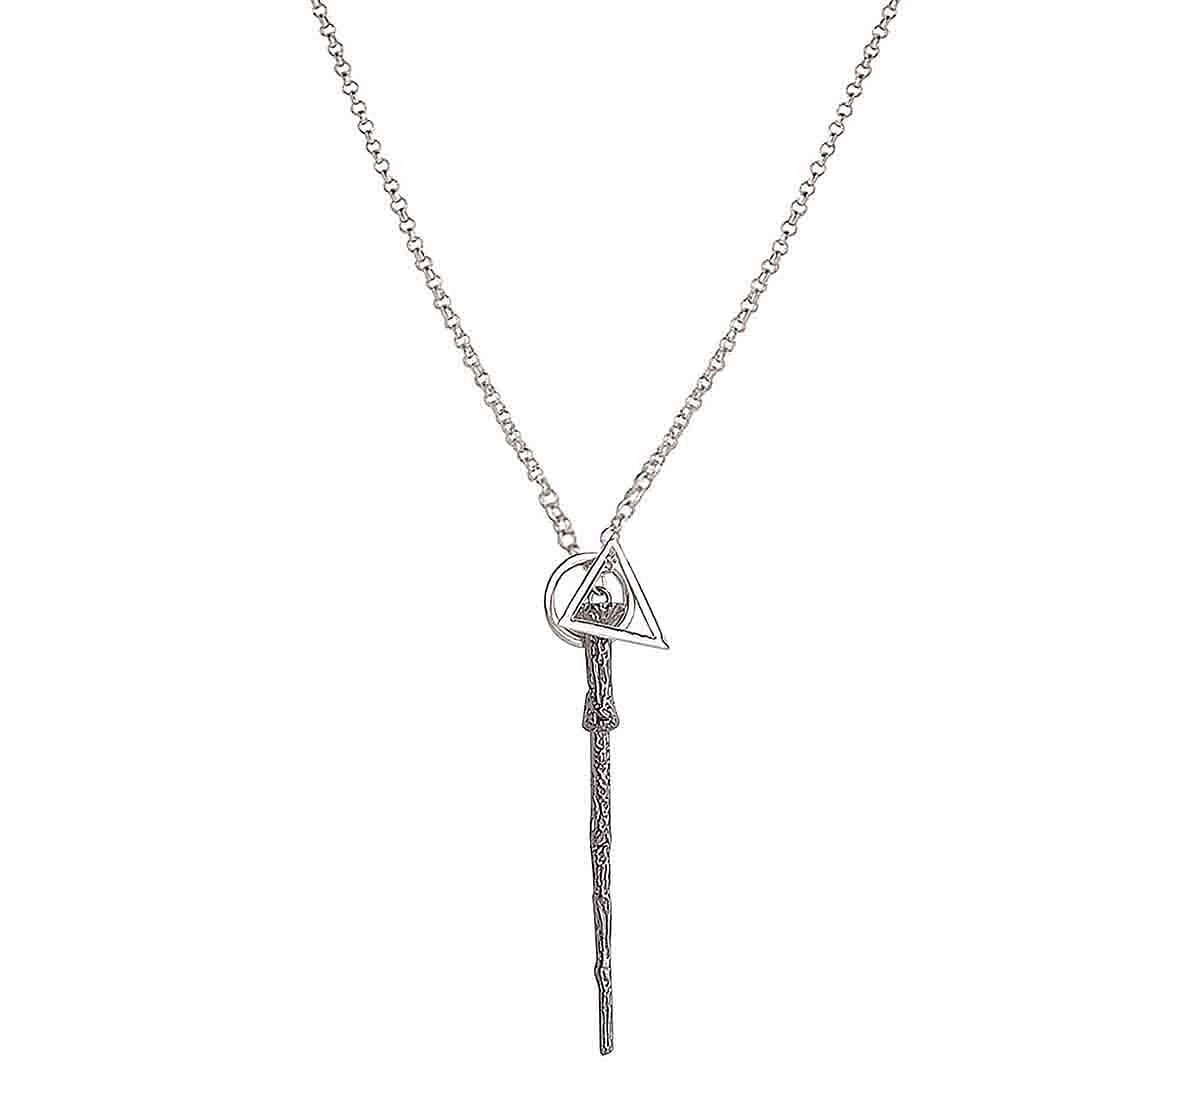 Harry Potter Deathly Hallows Necklace-Best Price in Doha,Qatar Buy at  Chikili.com